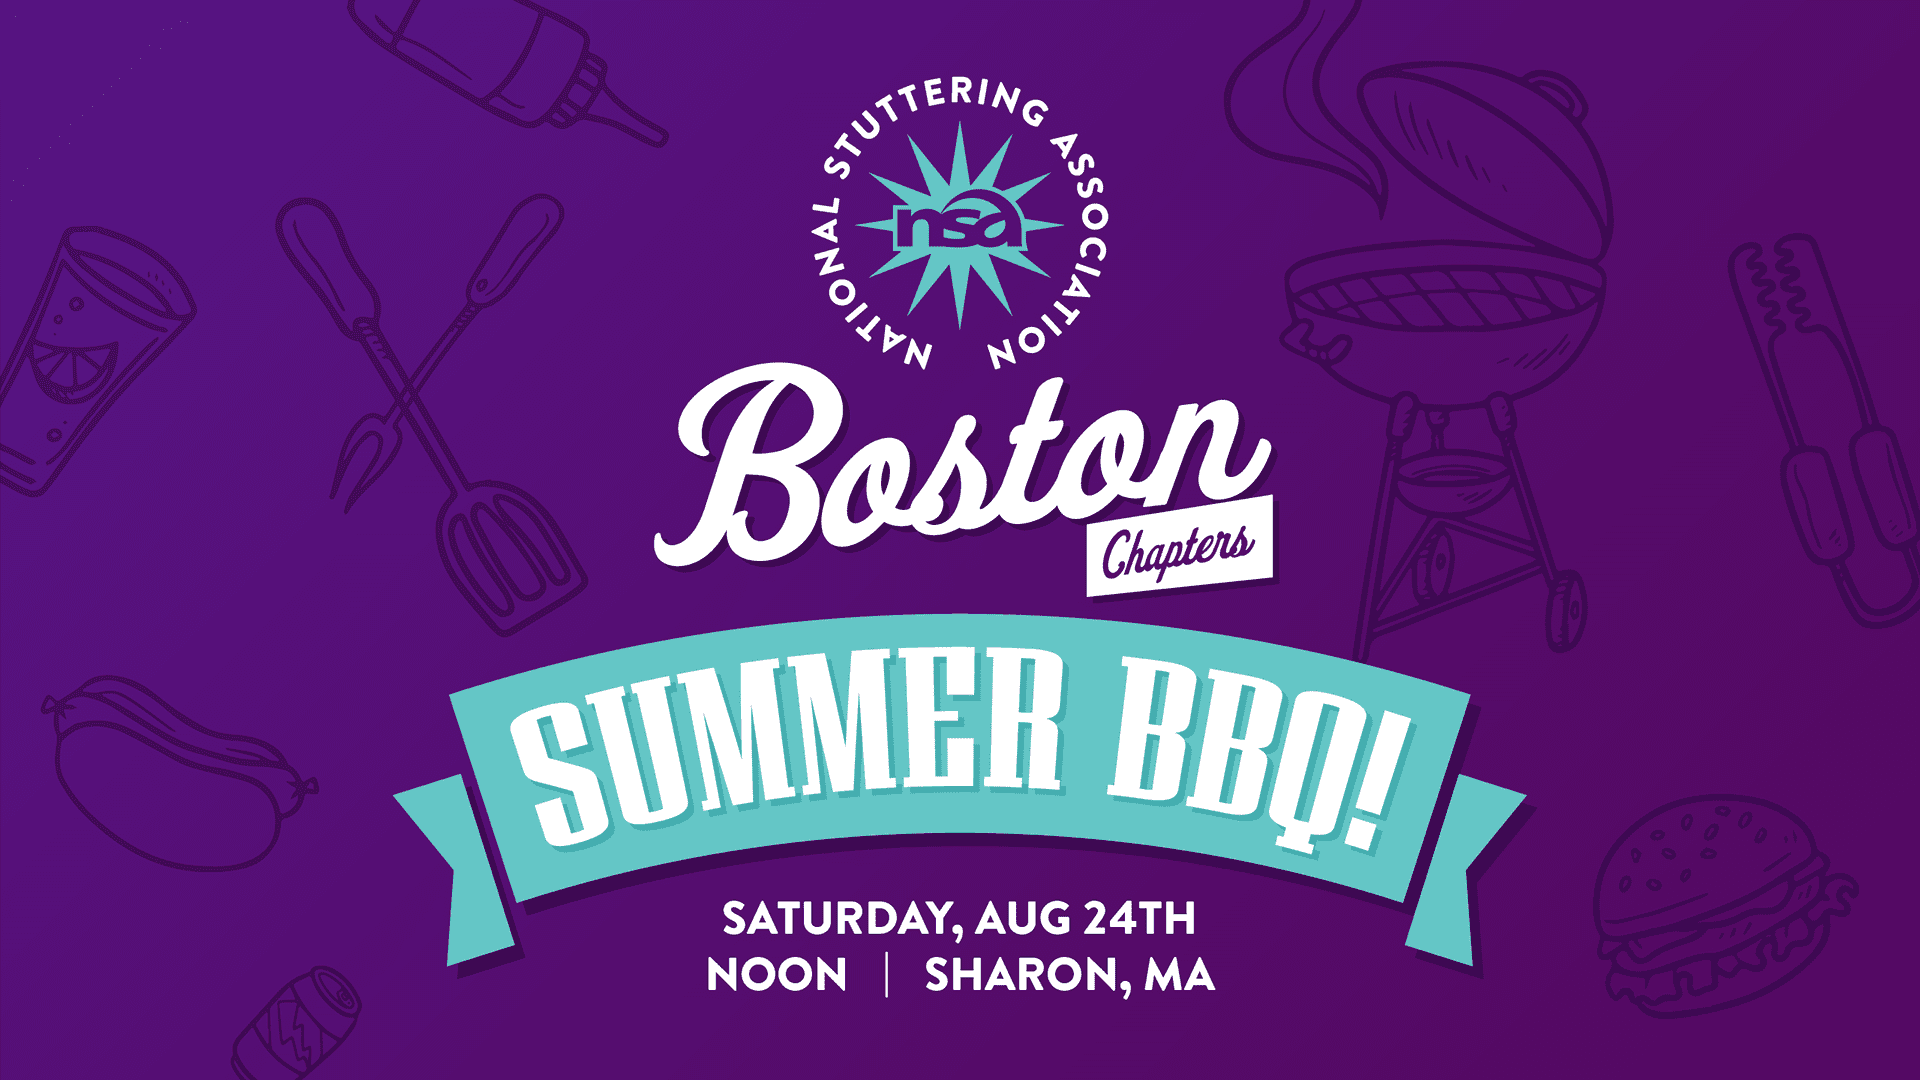 A purple graphic advertising the National Stuttering Association Boston Chapter's Summer BBQ. It includes icons of barbecue items and text stating the event is on Saturday, August 24th at noon in Sharon, MA.